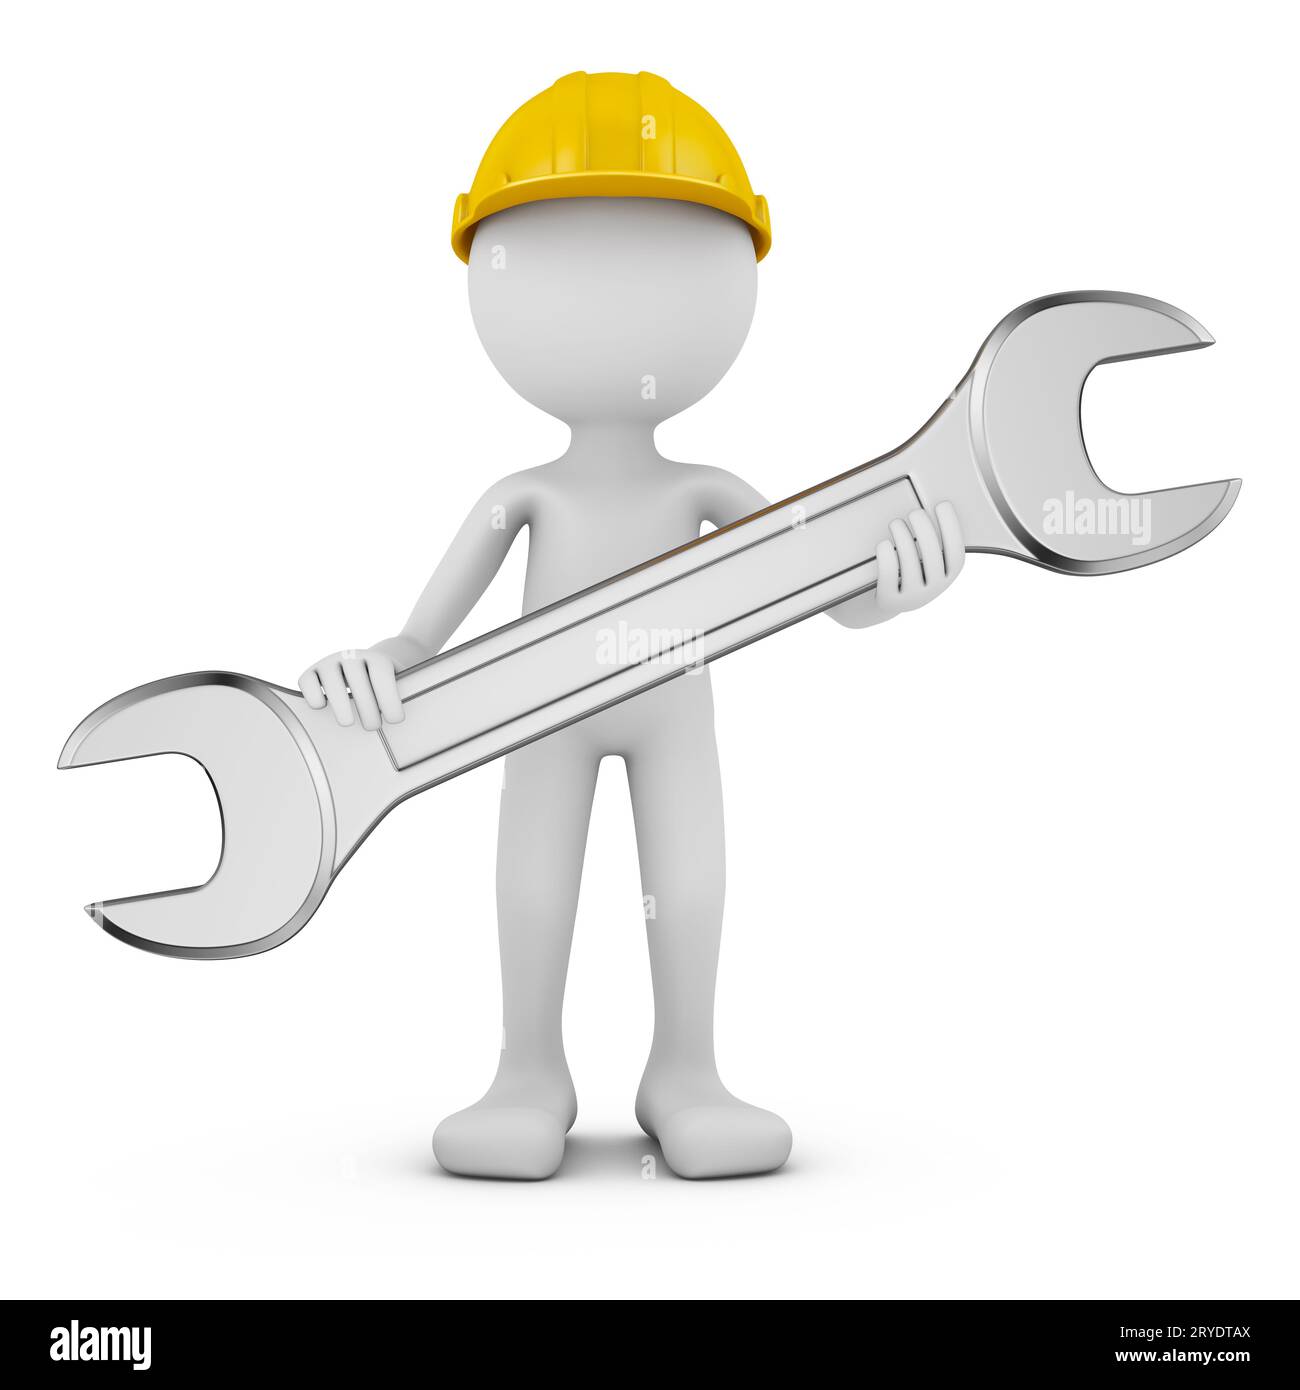 Man with wrench Stock Photo